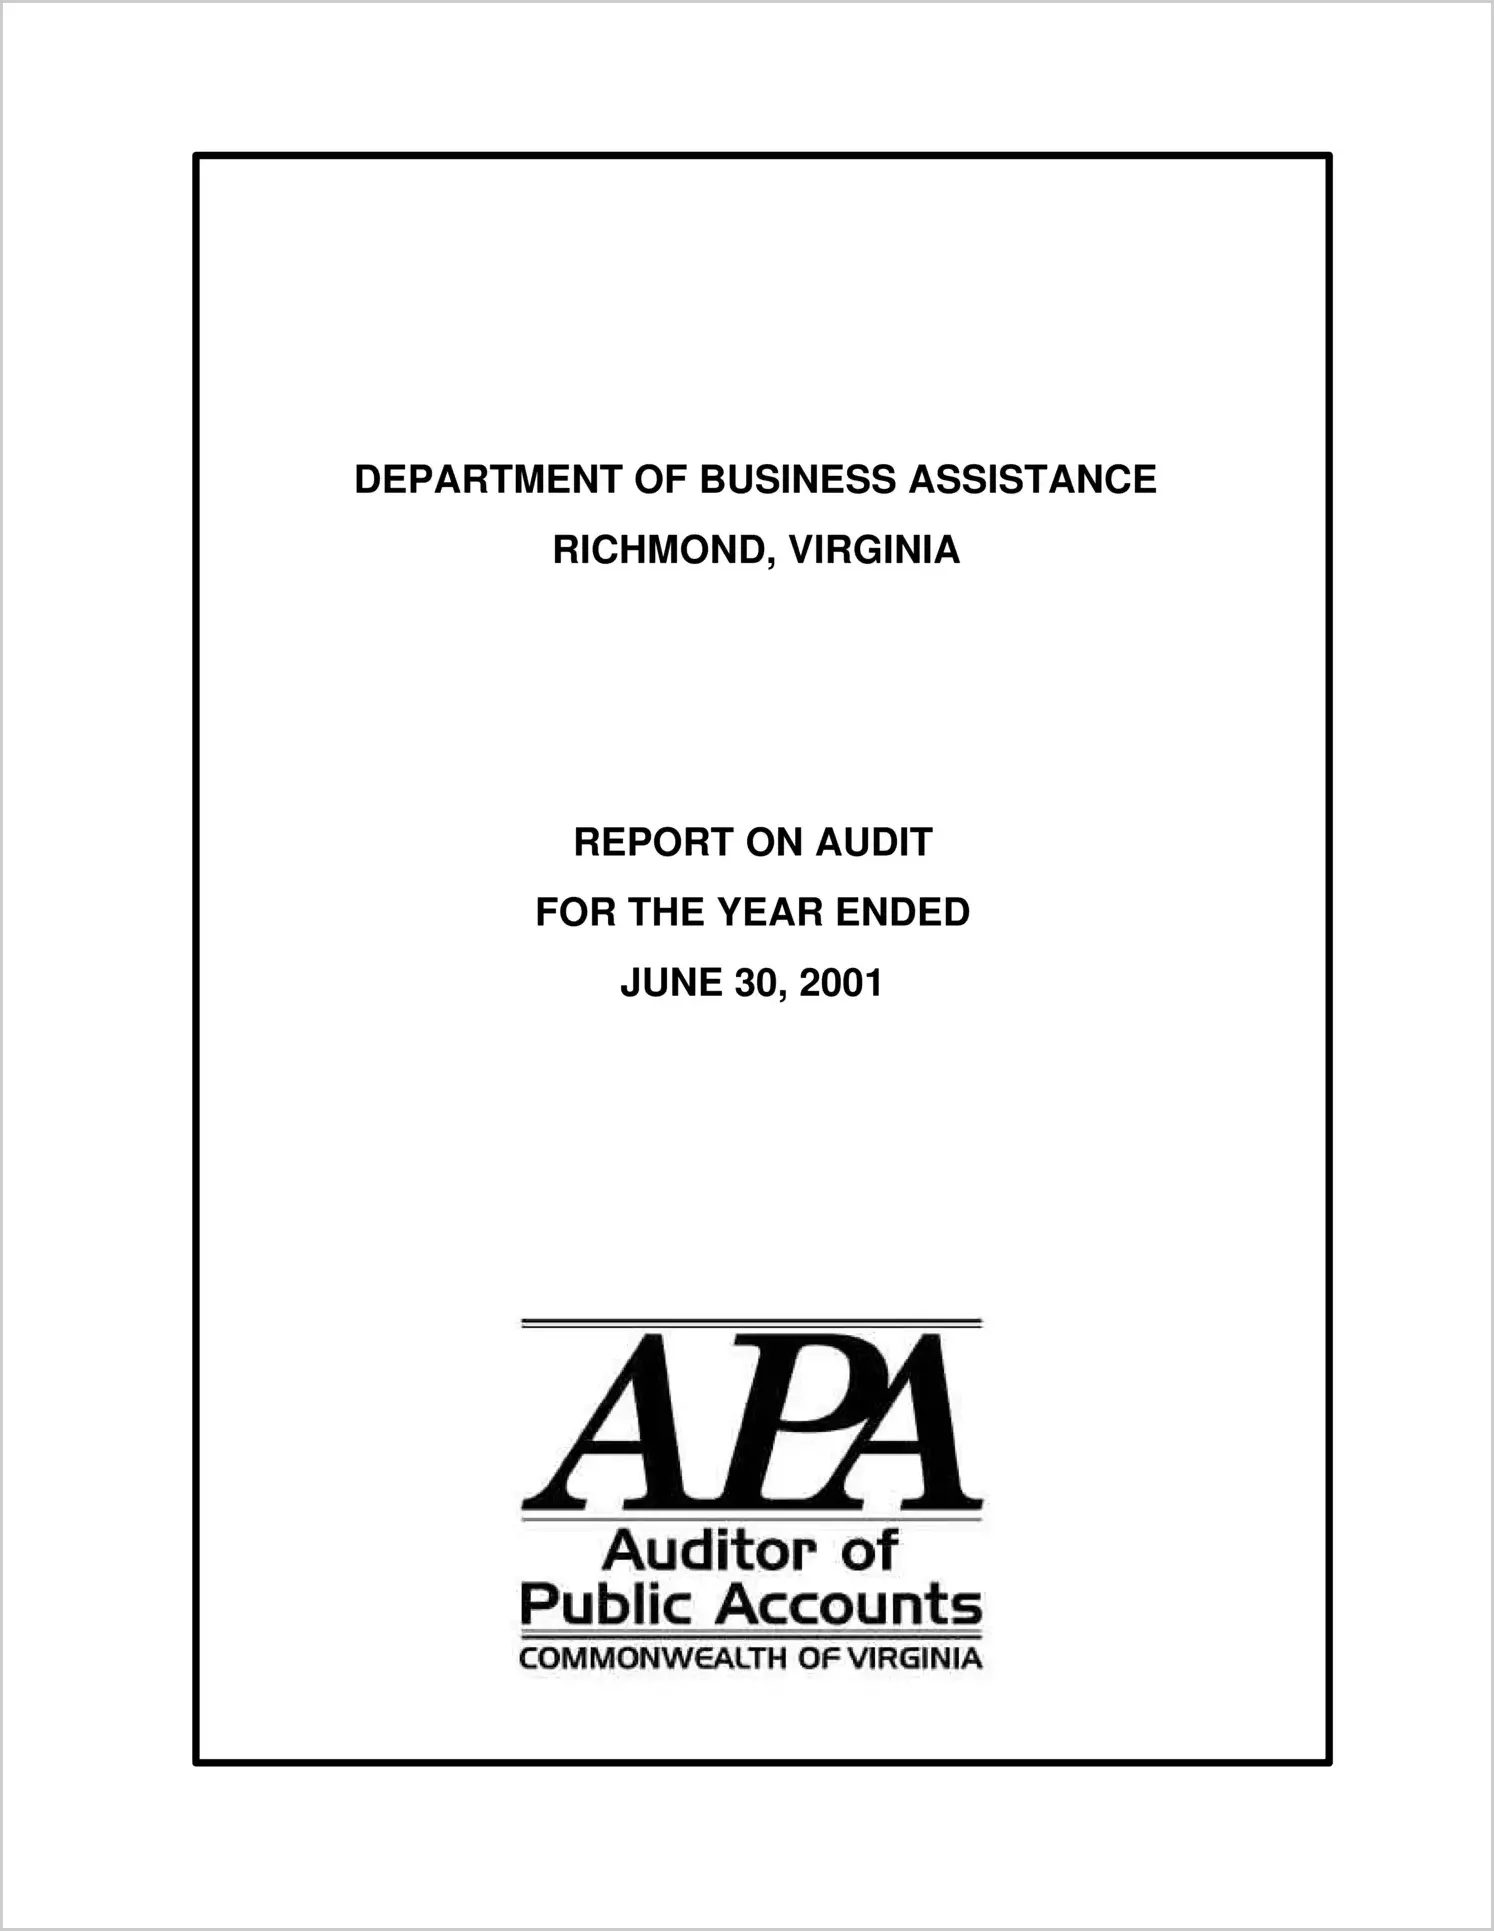 Department of Business Assistance for the year ended June 30, 2001